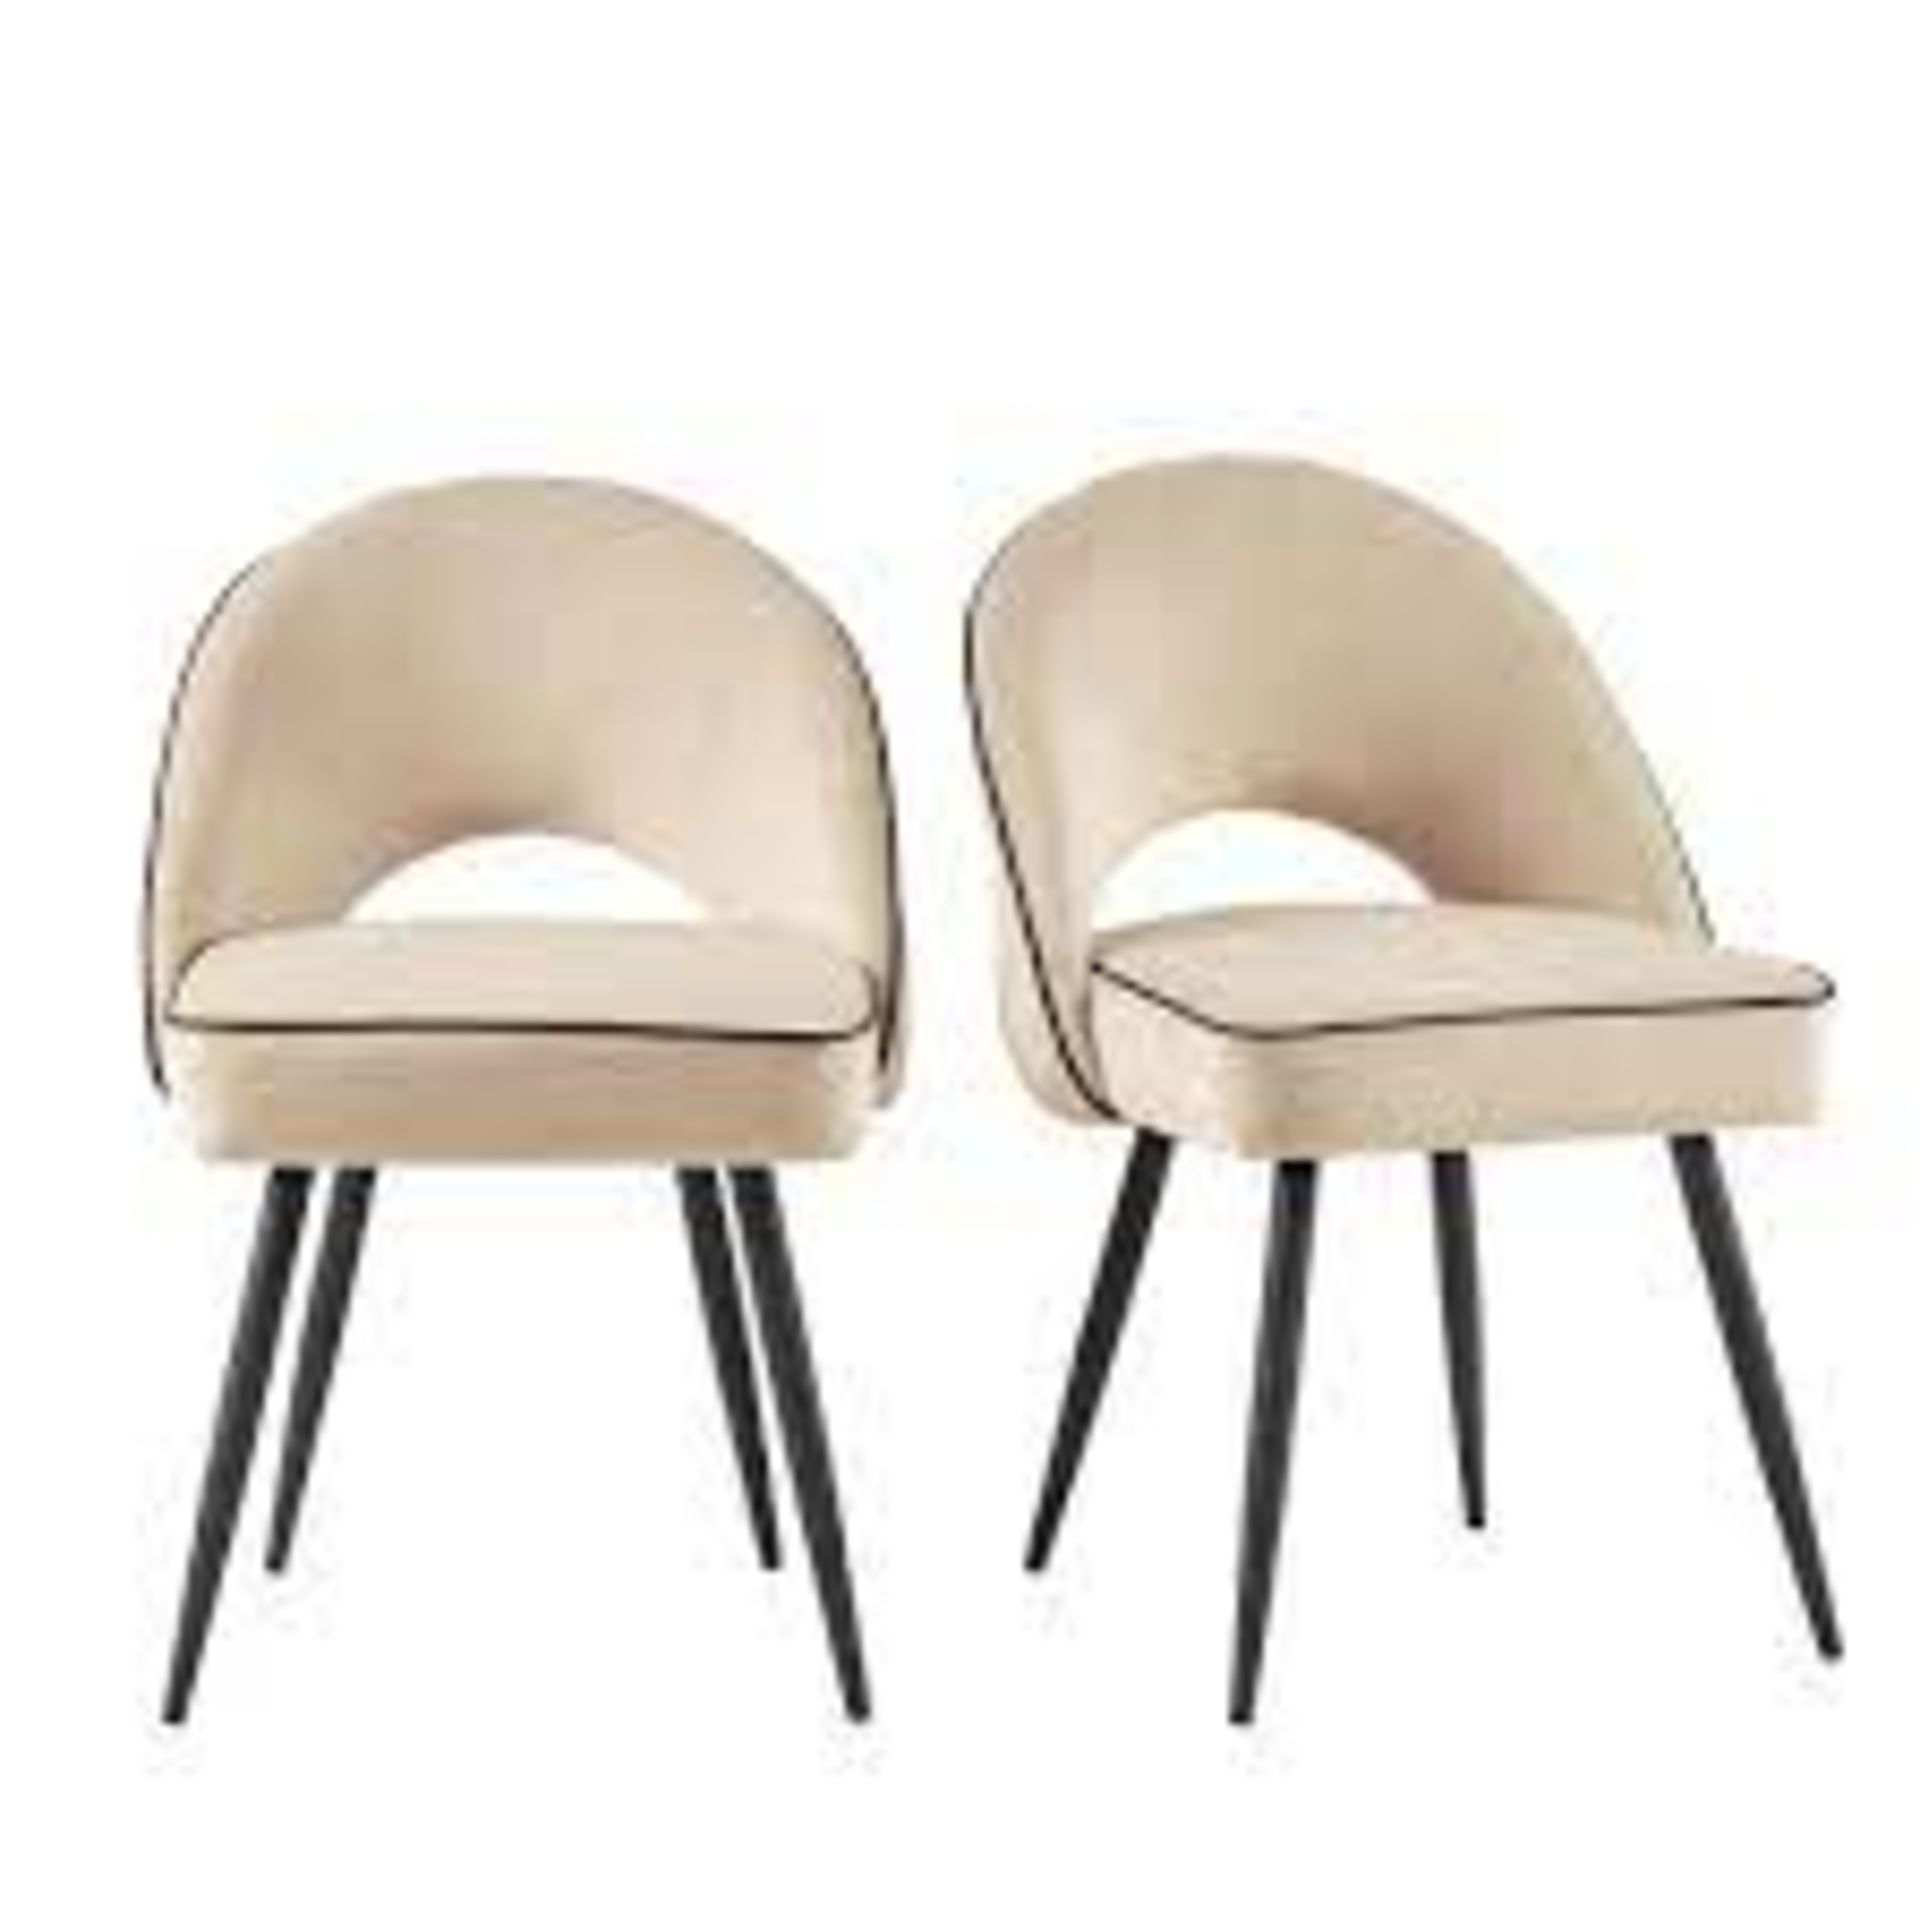 Oakley Set of 2 Champagne Velvet Upholstered Dining Chairs with Contrast Piping. - SR5. RRP £259.99. - Image 2 of 2